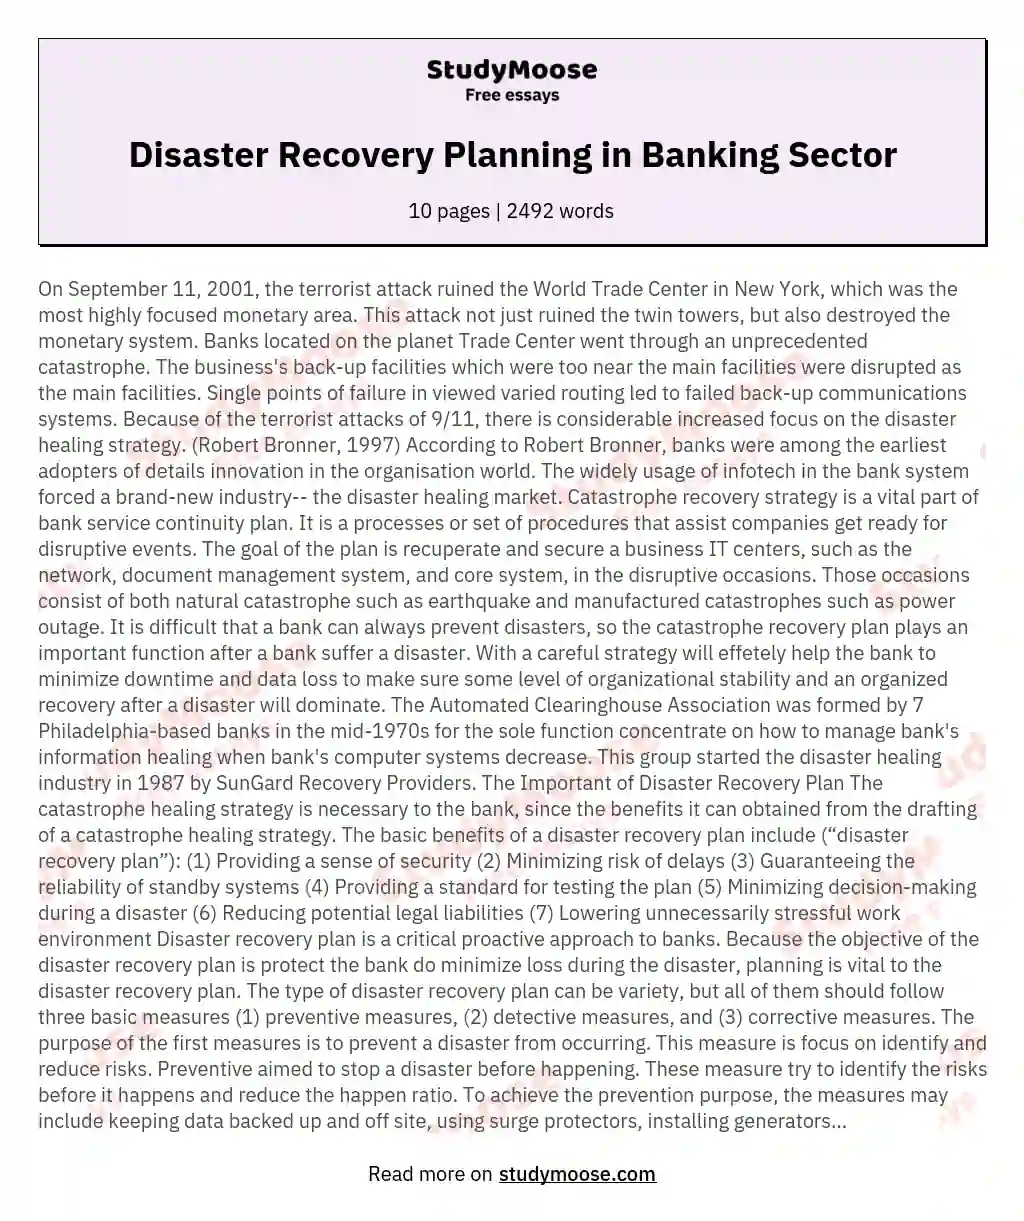 Disaster Recovery Planning in Banking Sector